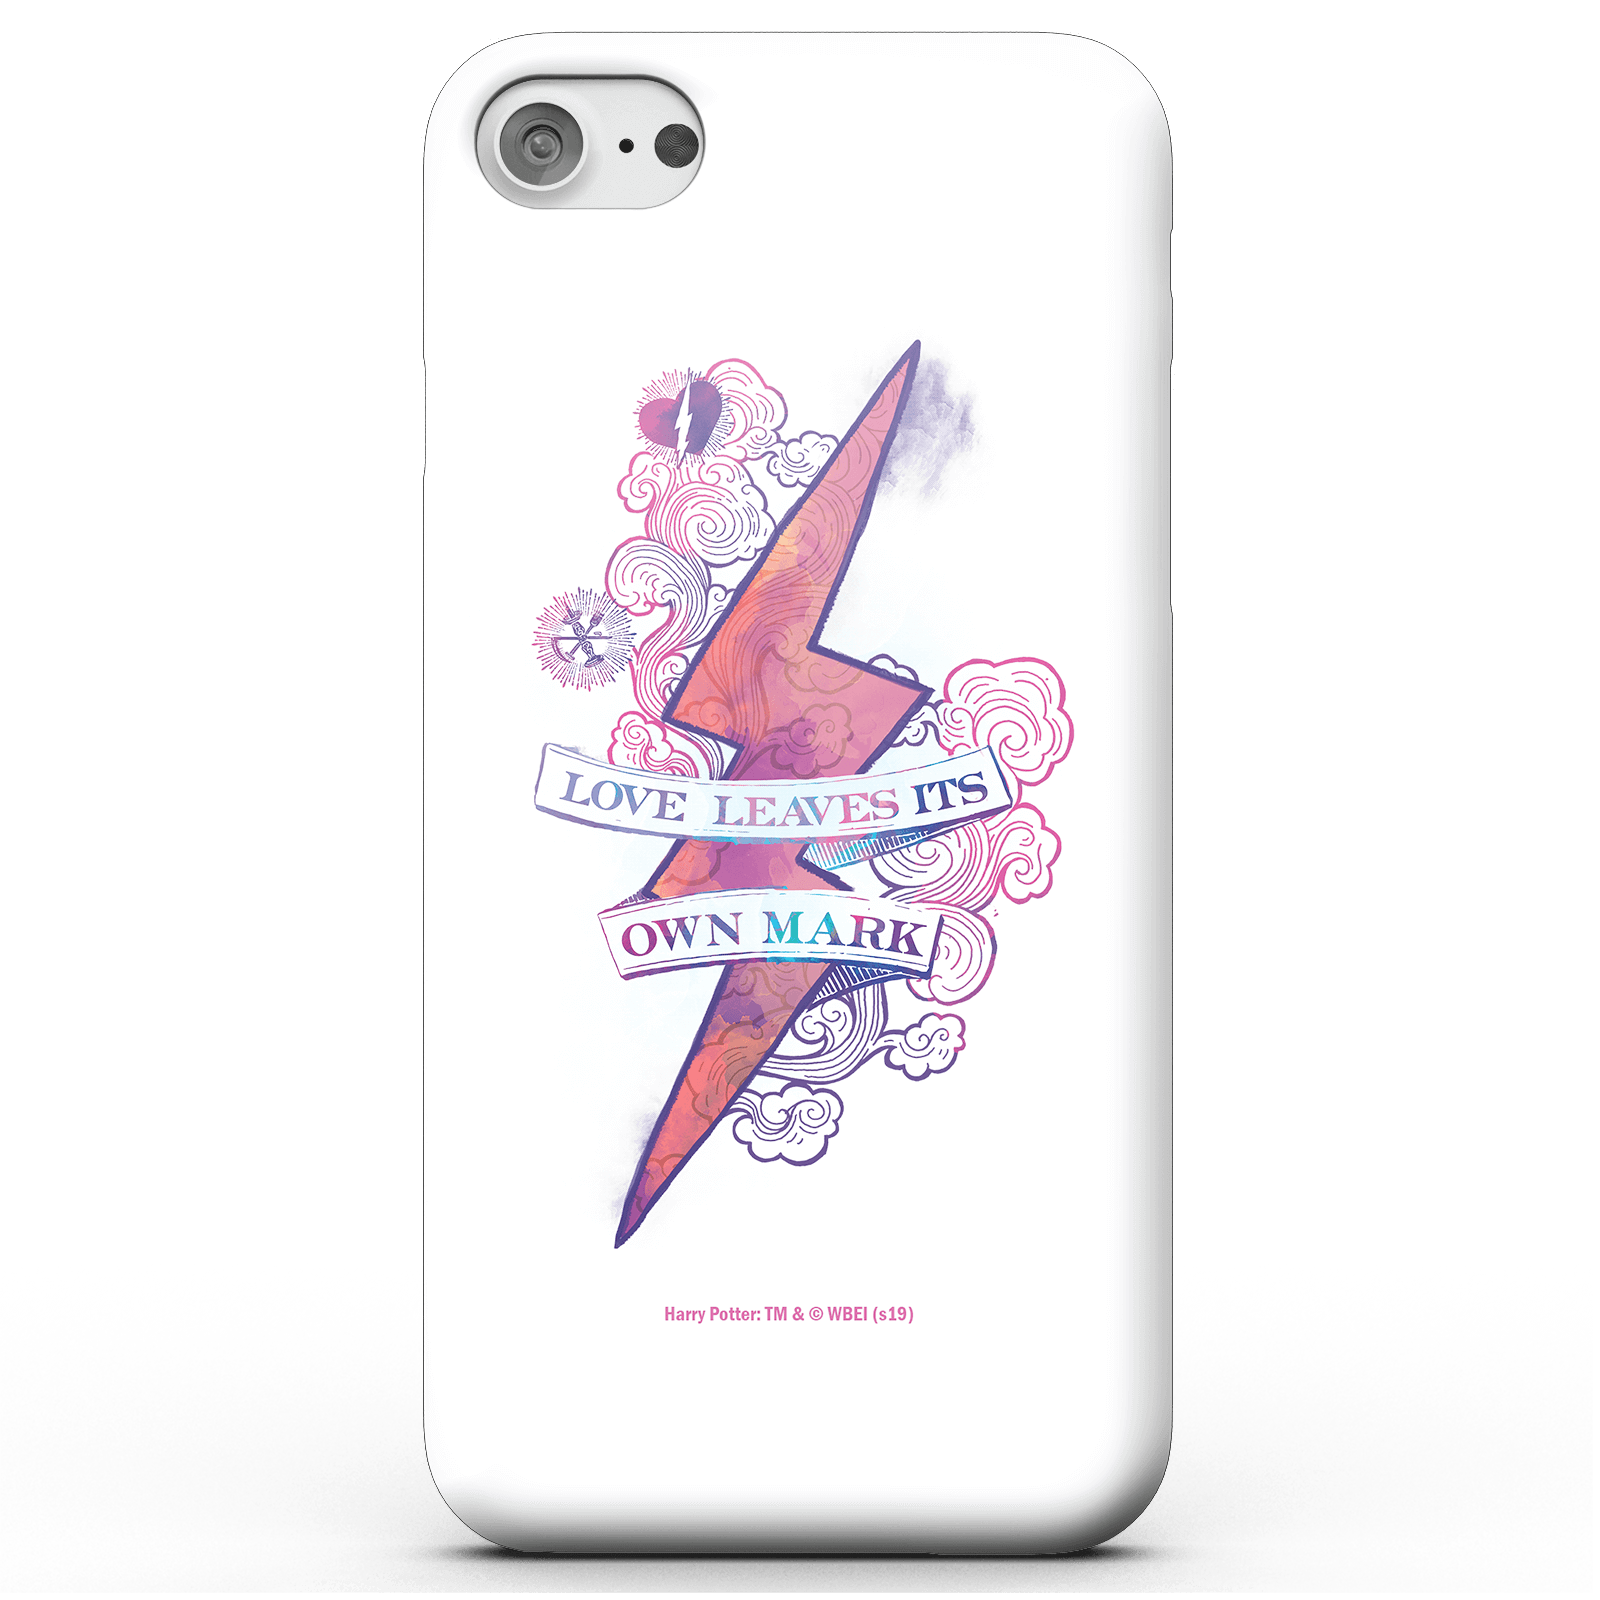 Harry Potter Love Leaves Its Own Mark Phone Case for iPhone and Android - iPhone XS - Snap Case - Matte